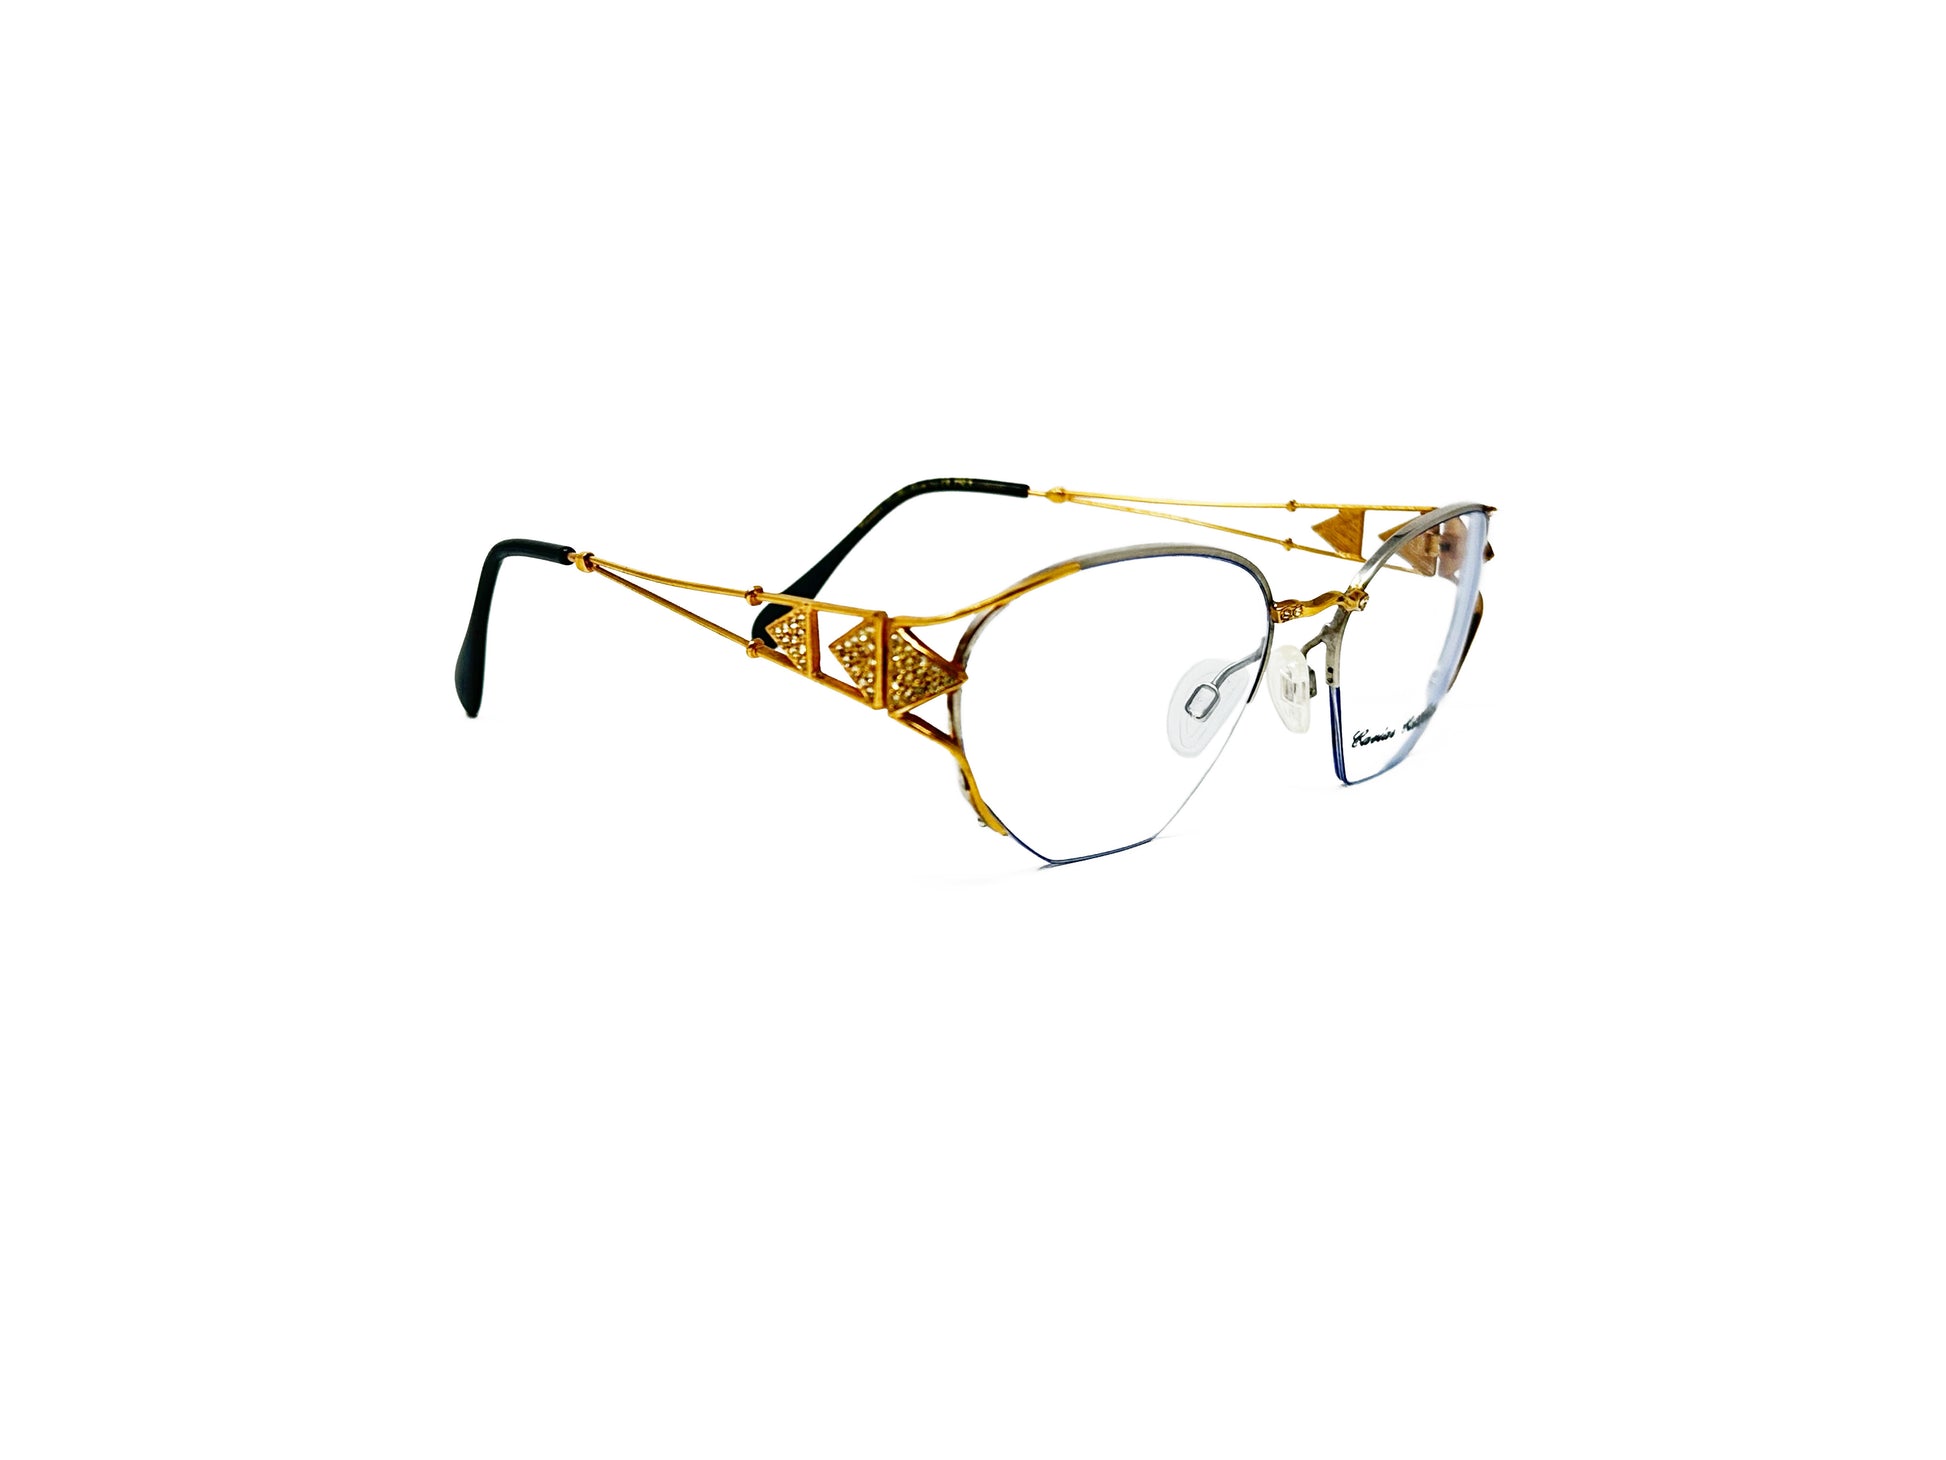 Ultra half-rim optical frame with metal ornate temples and wavy nose bridge. Model: 1893. Color: 25 Gold. Side view.